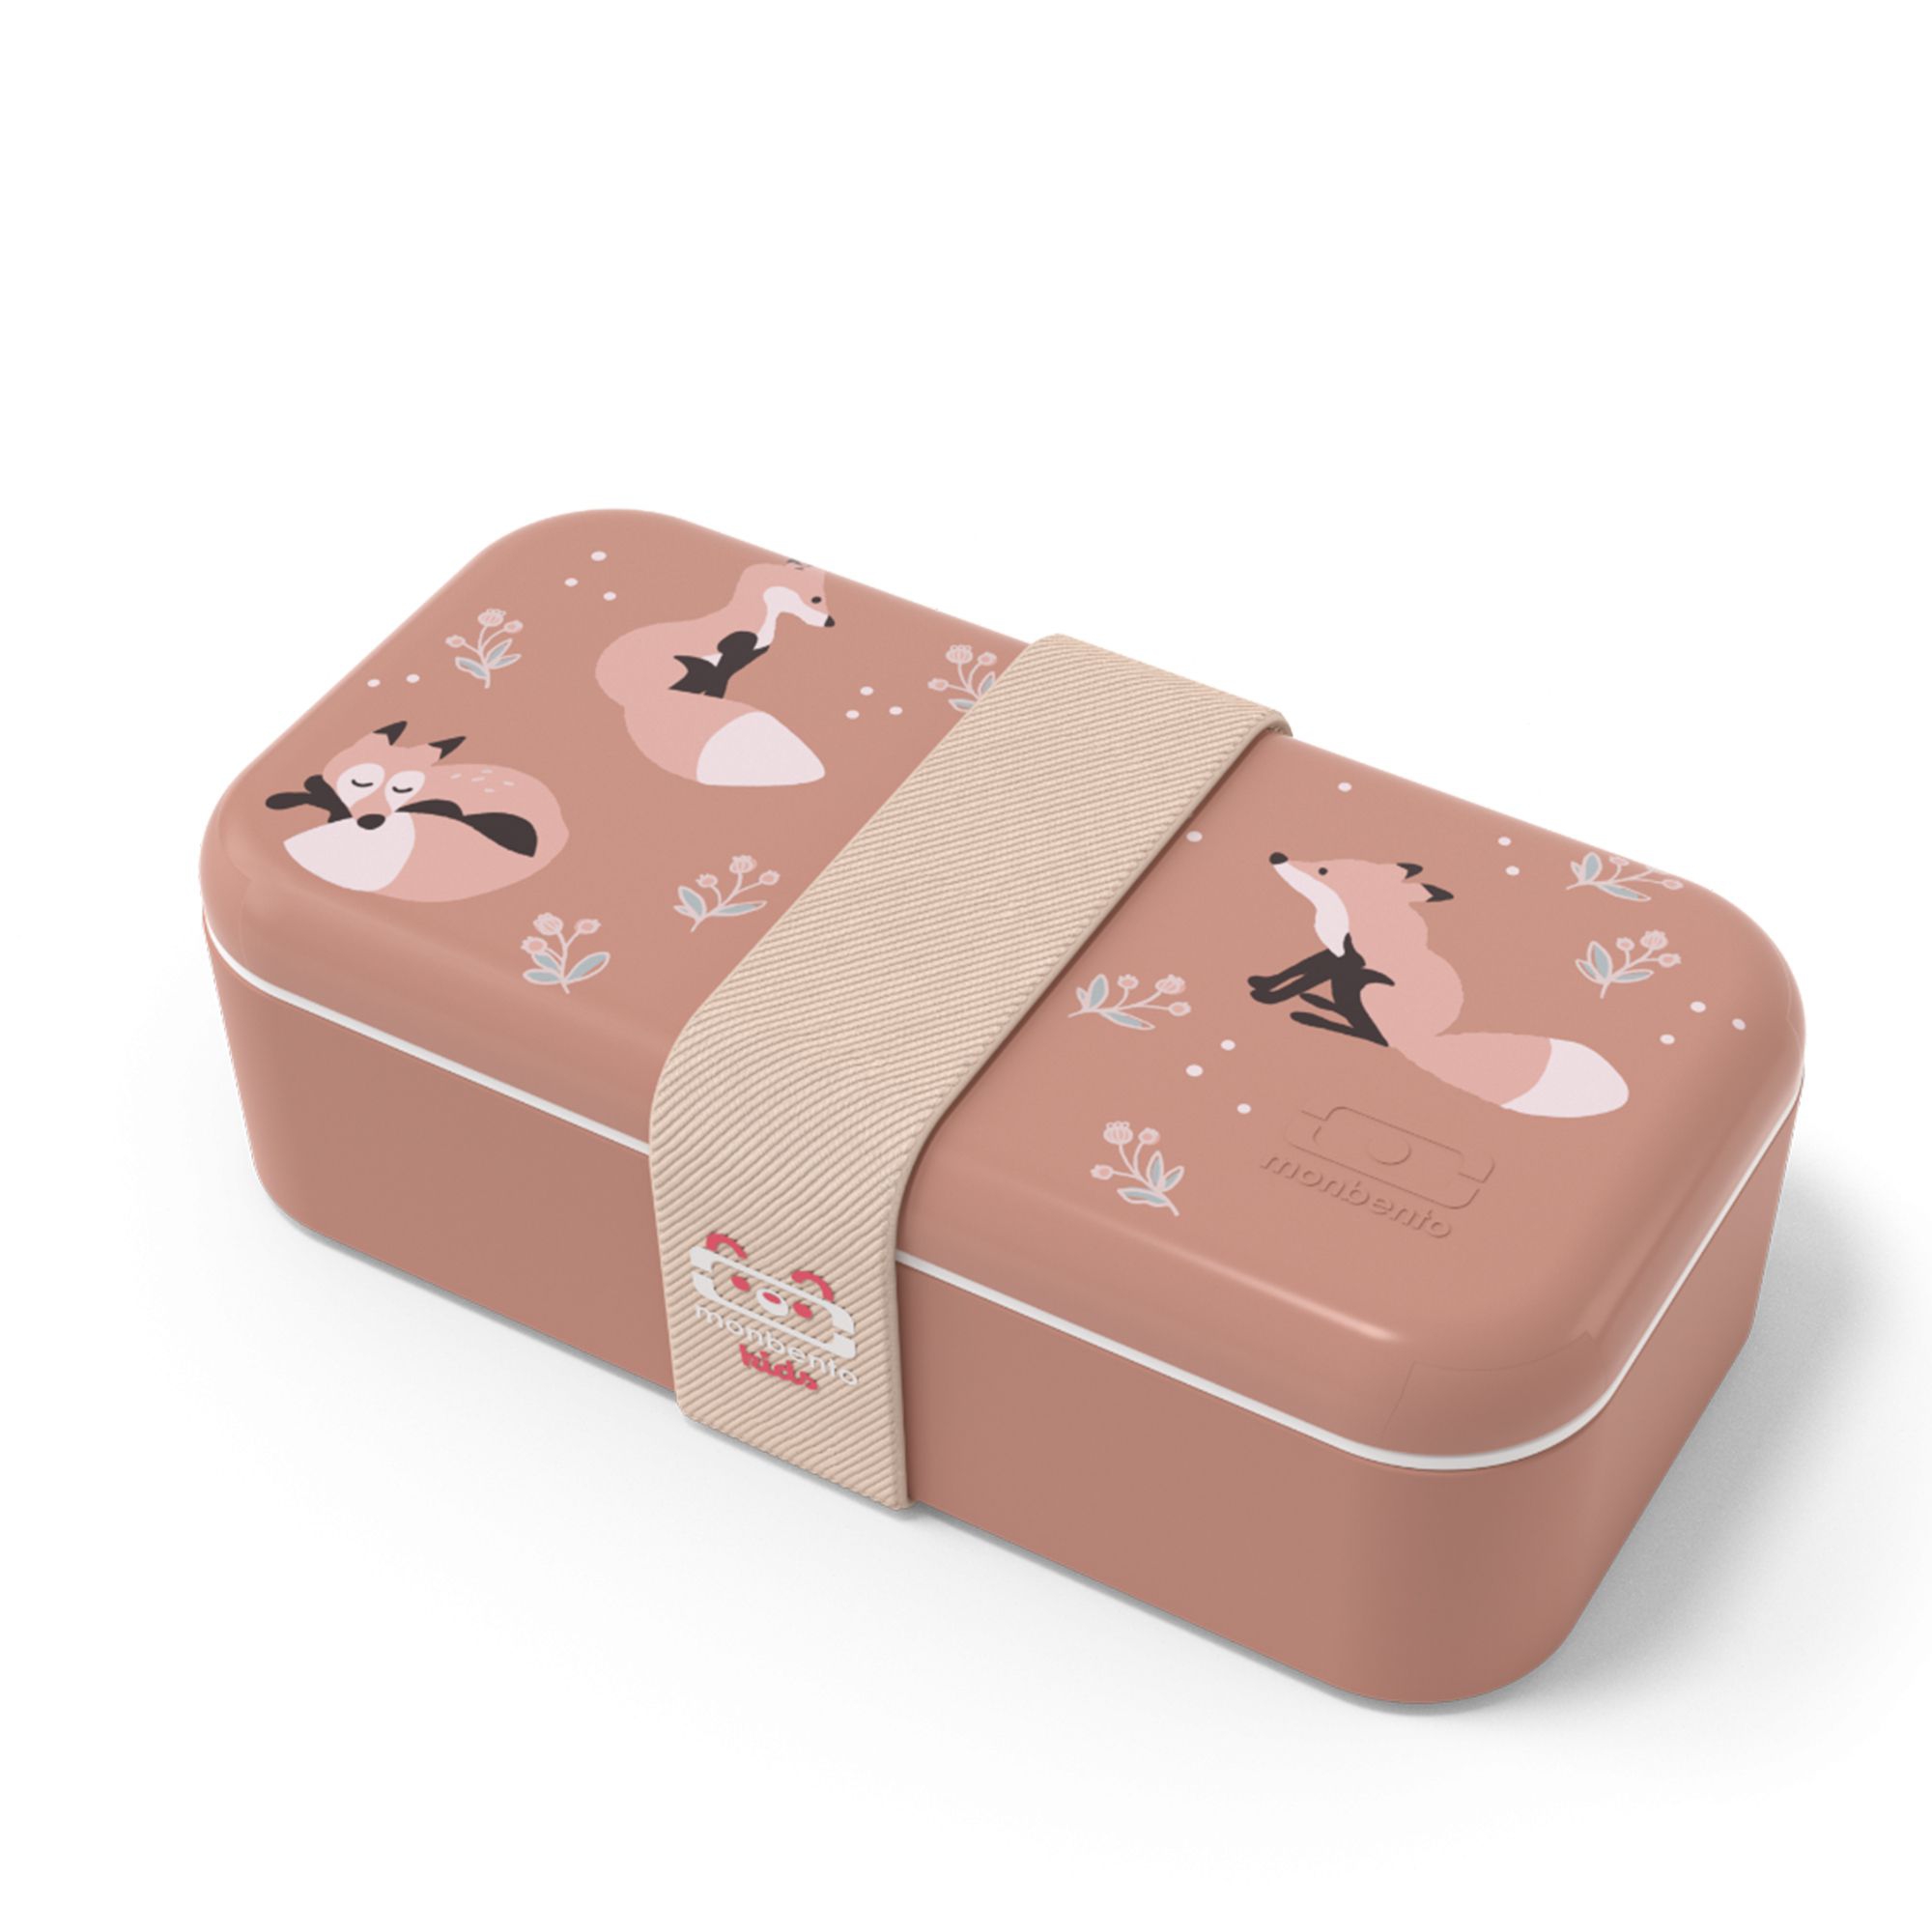 MB Original engraved - the bento box with flowers Roses Made in France -  Love Gift